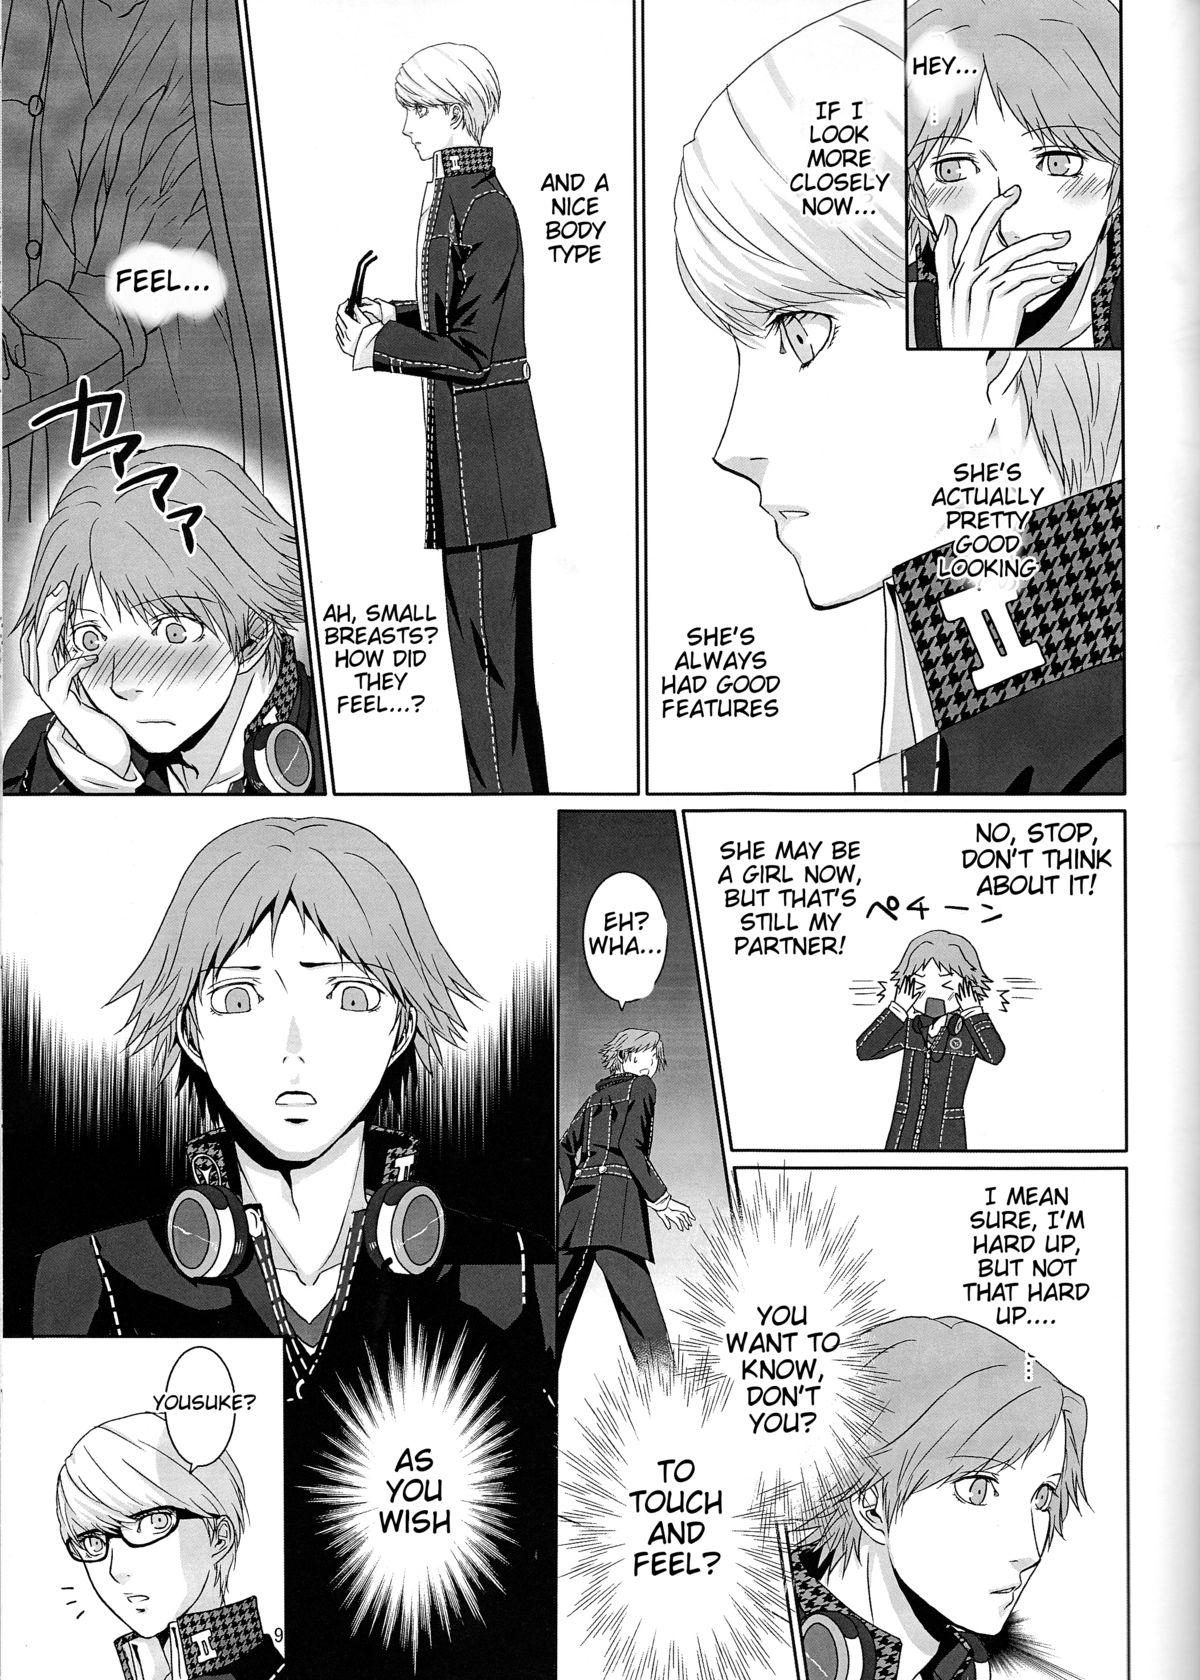 Masseur what happened?! - Persona 4 Hardsex - Page 10